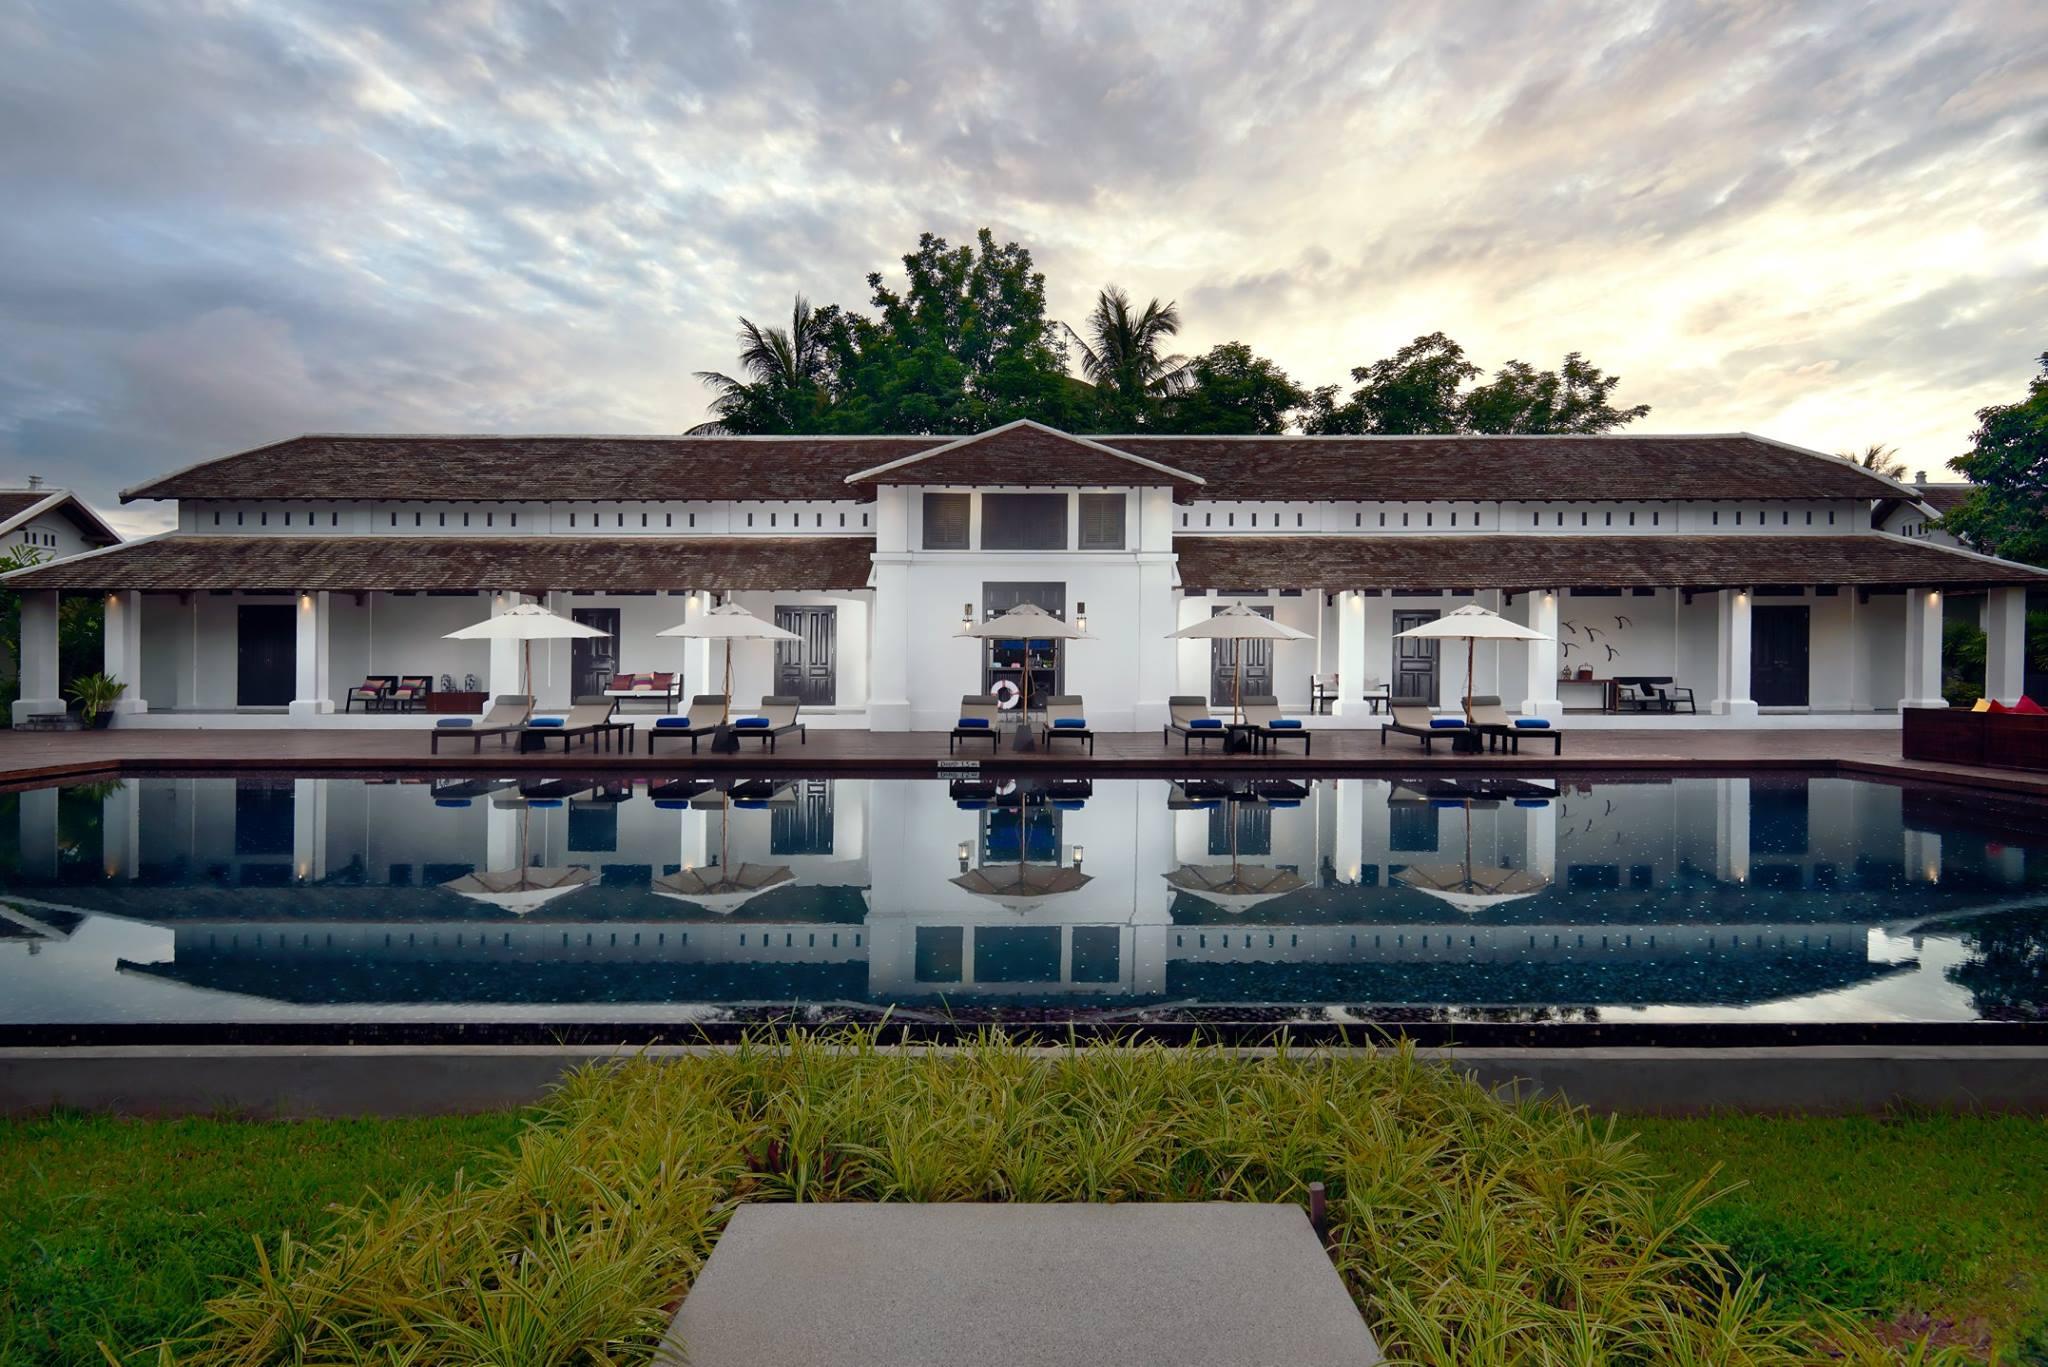 The Sofitel Luang Prabang is set in the former French governor's residence